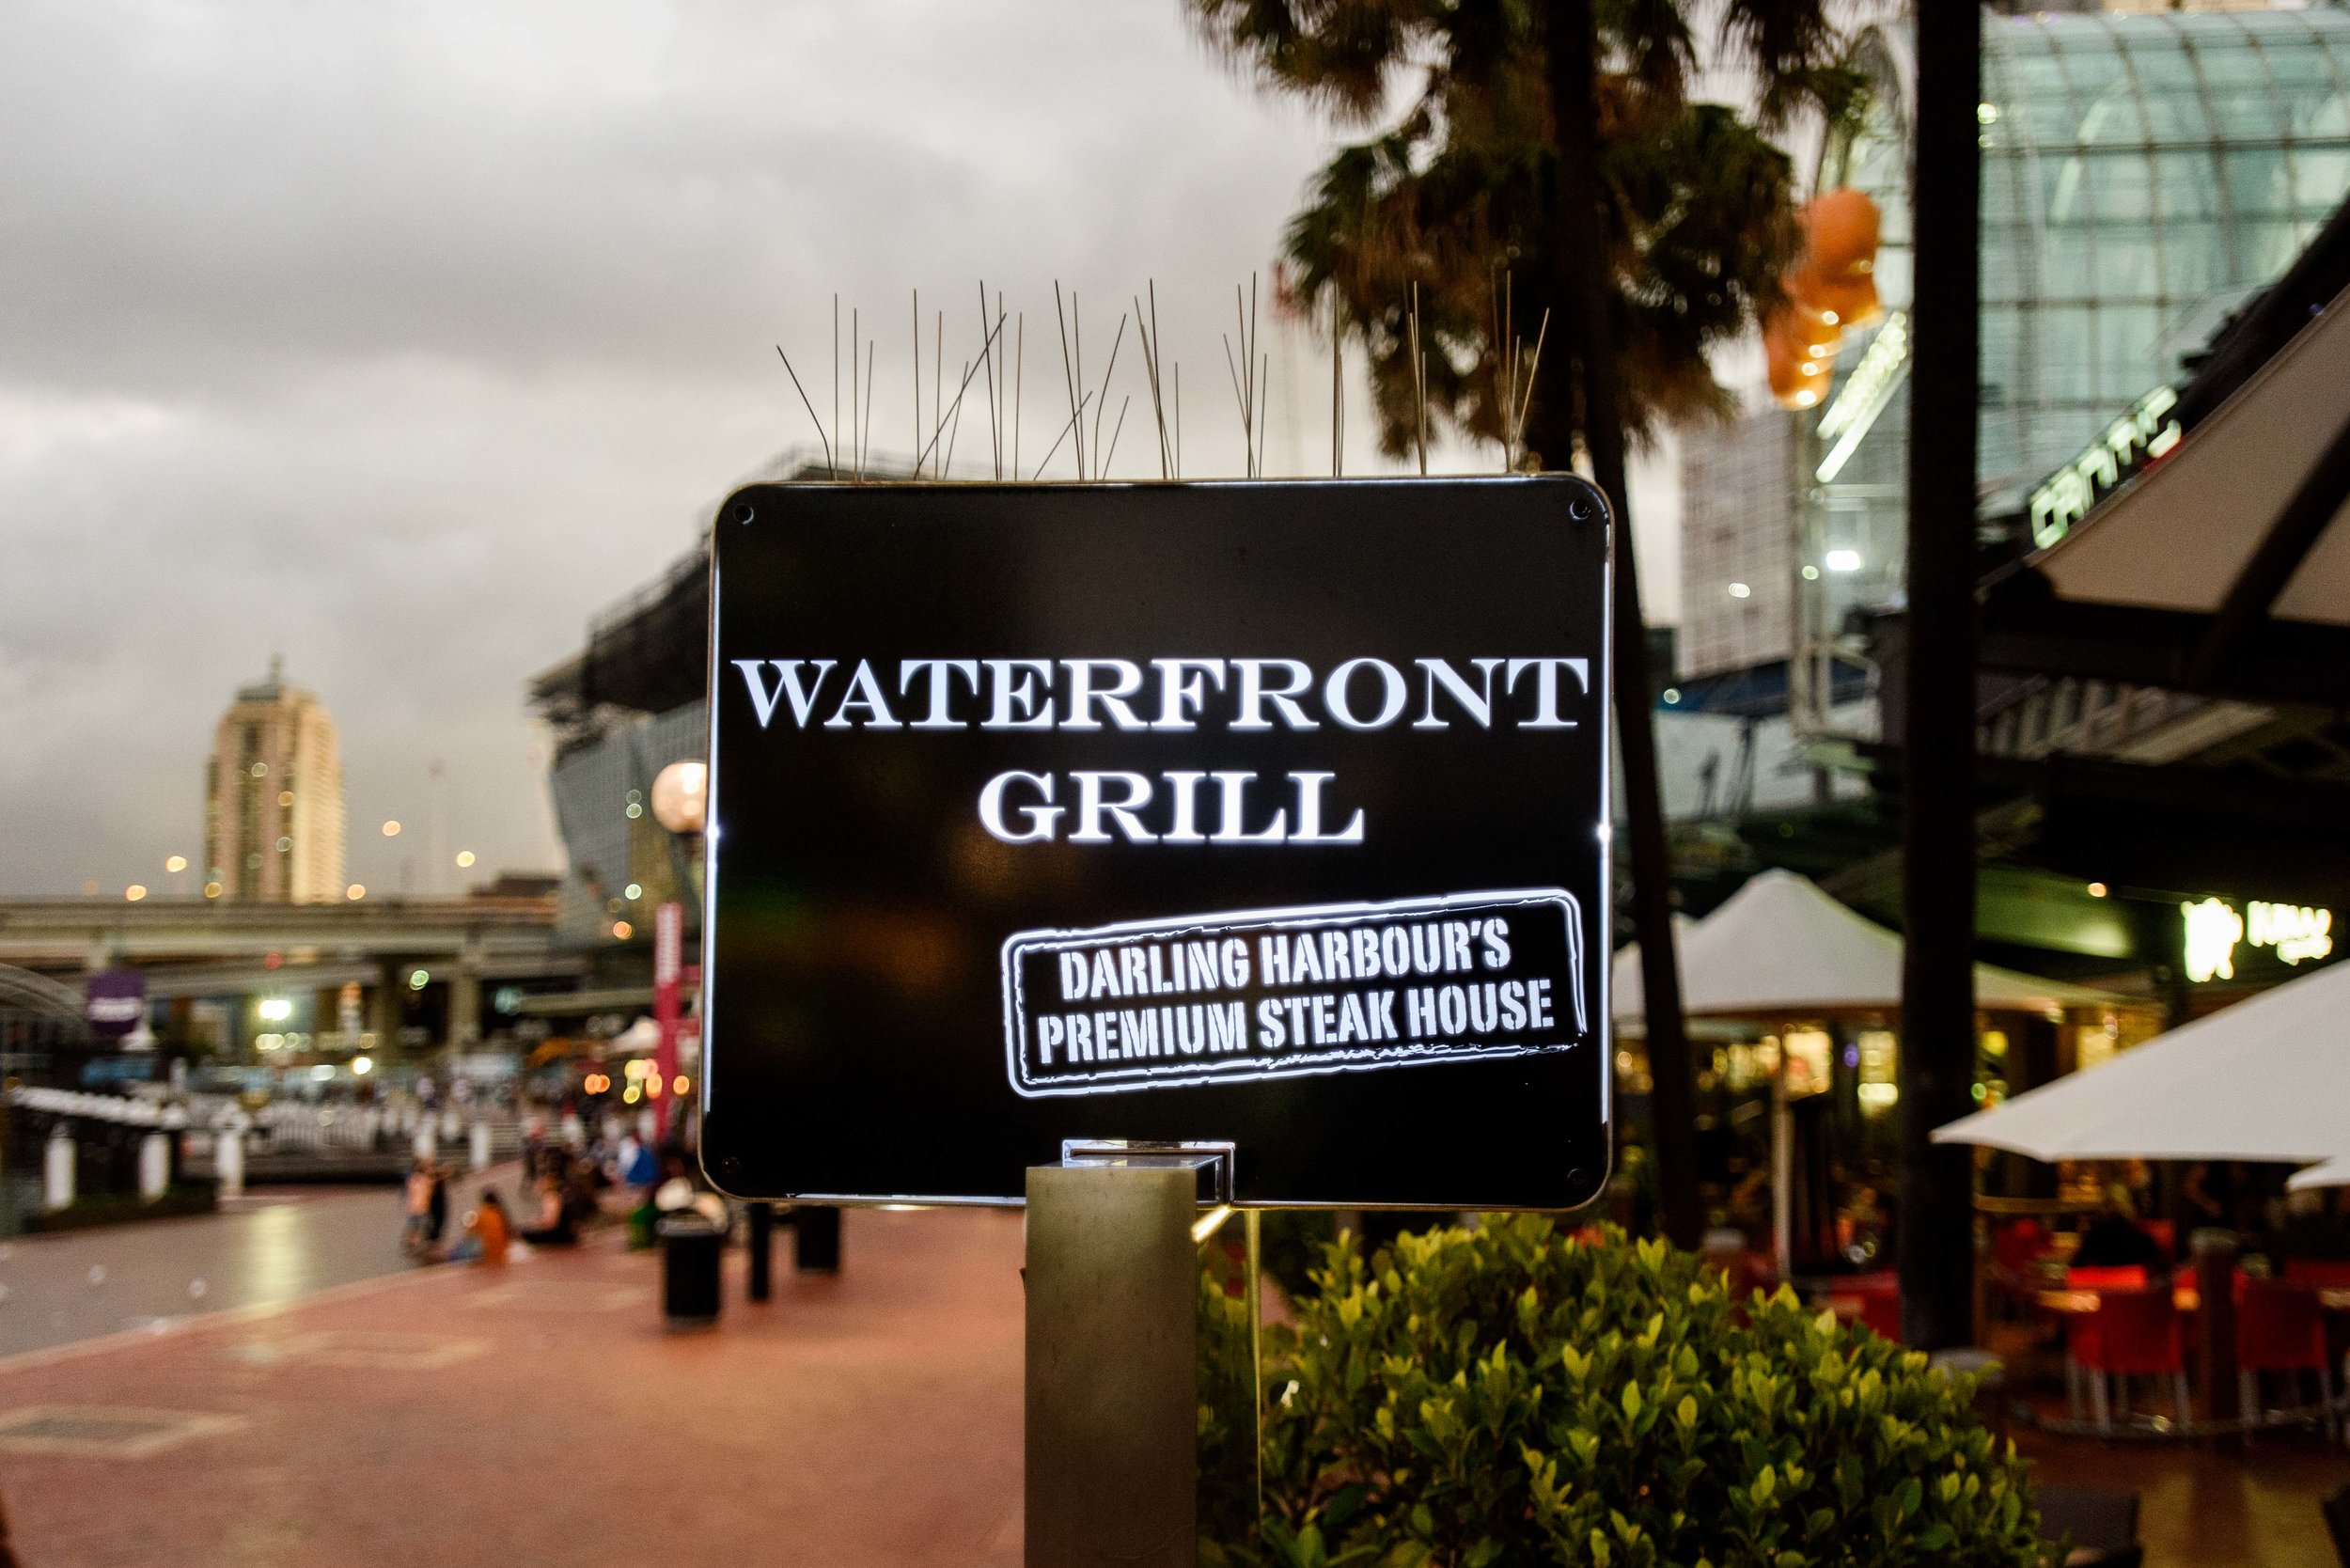 Waterfront-Grill-Venue-Feature-2.jpg